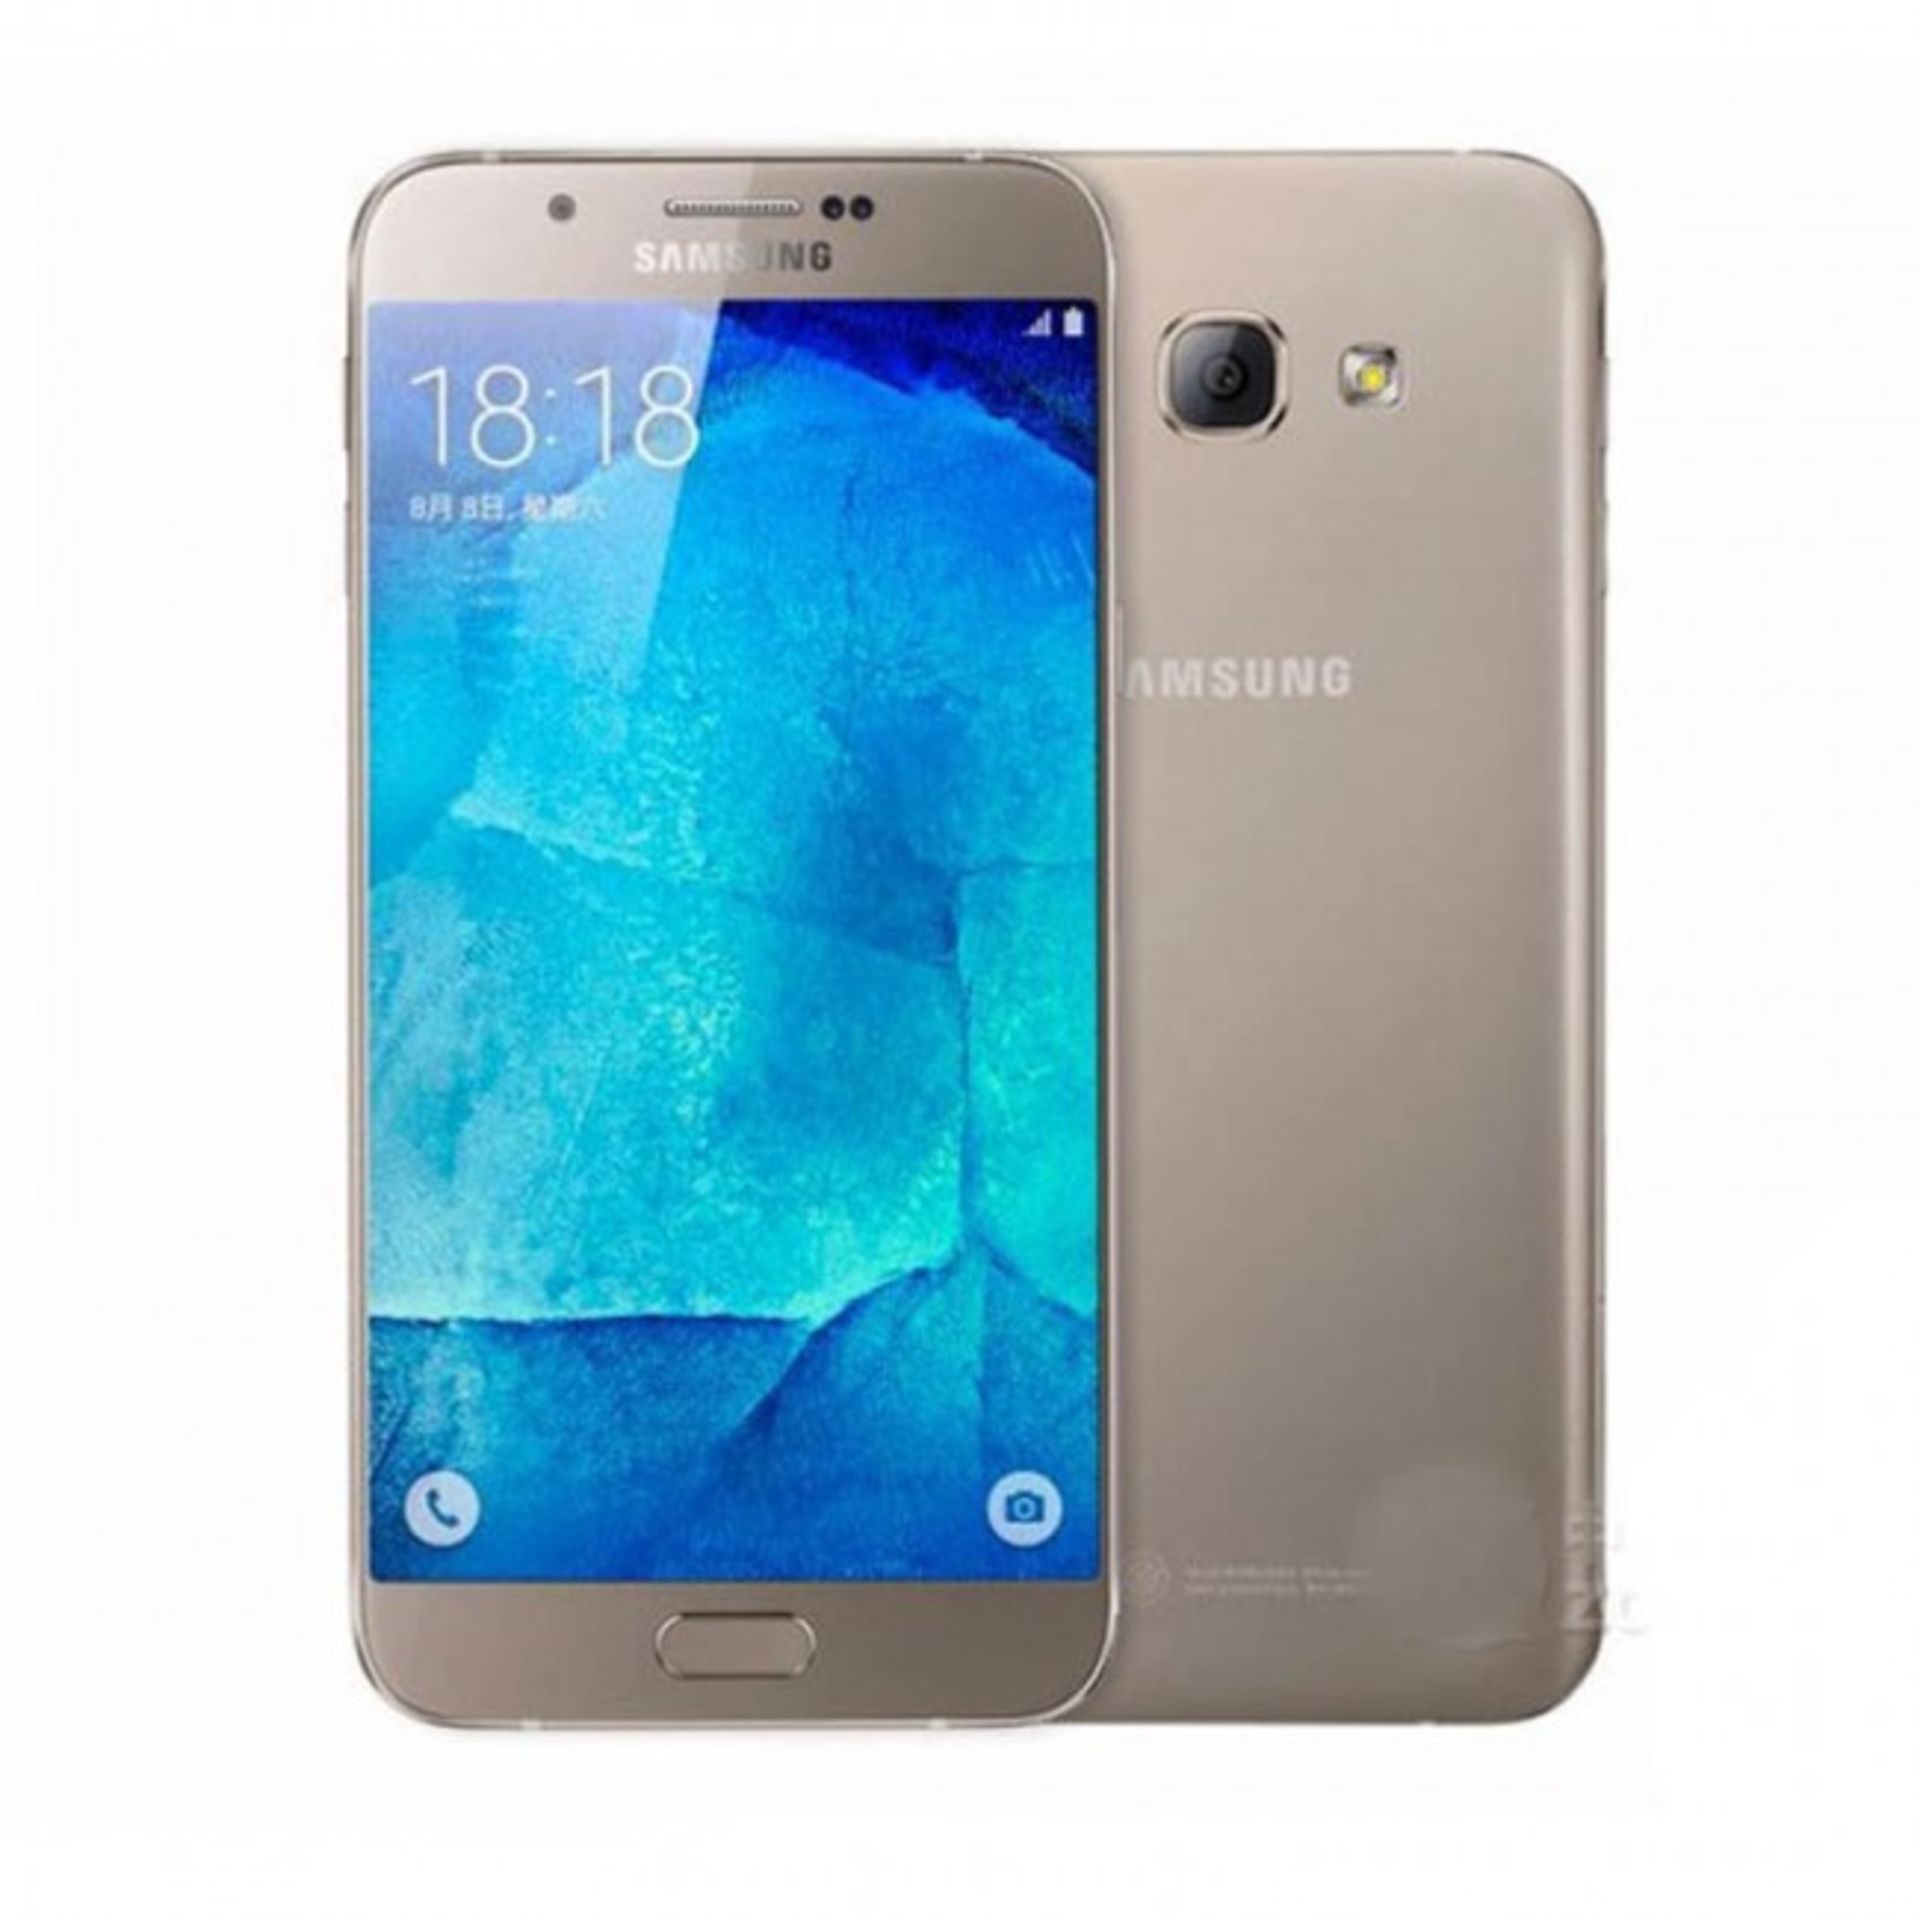 Grade A Samsung A8000 Colours May Vary Item available approx 10 working days after sale